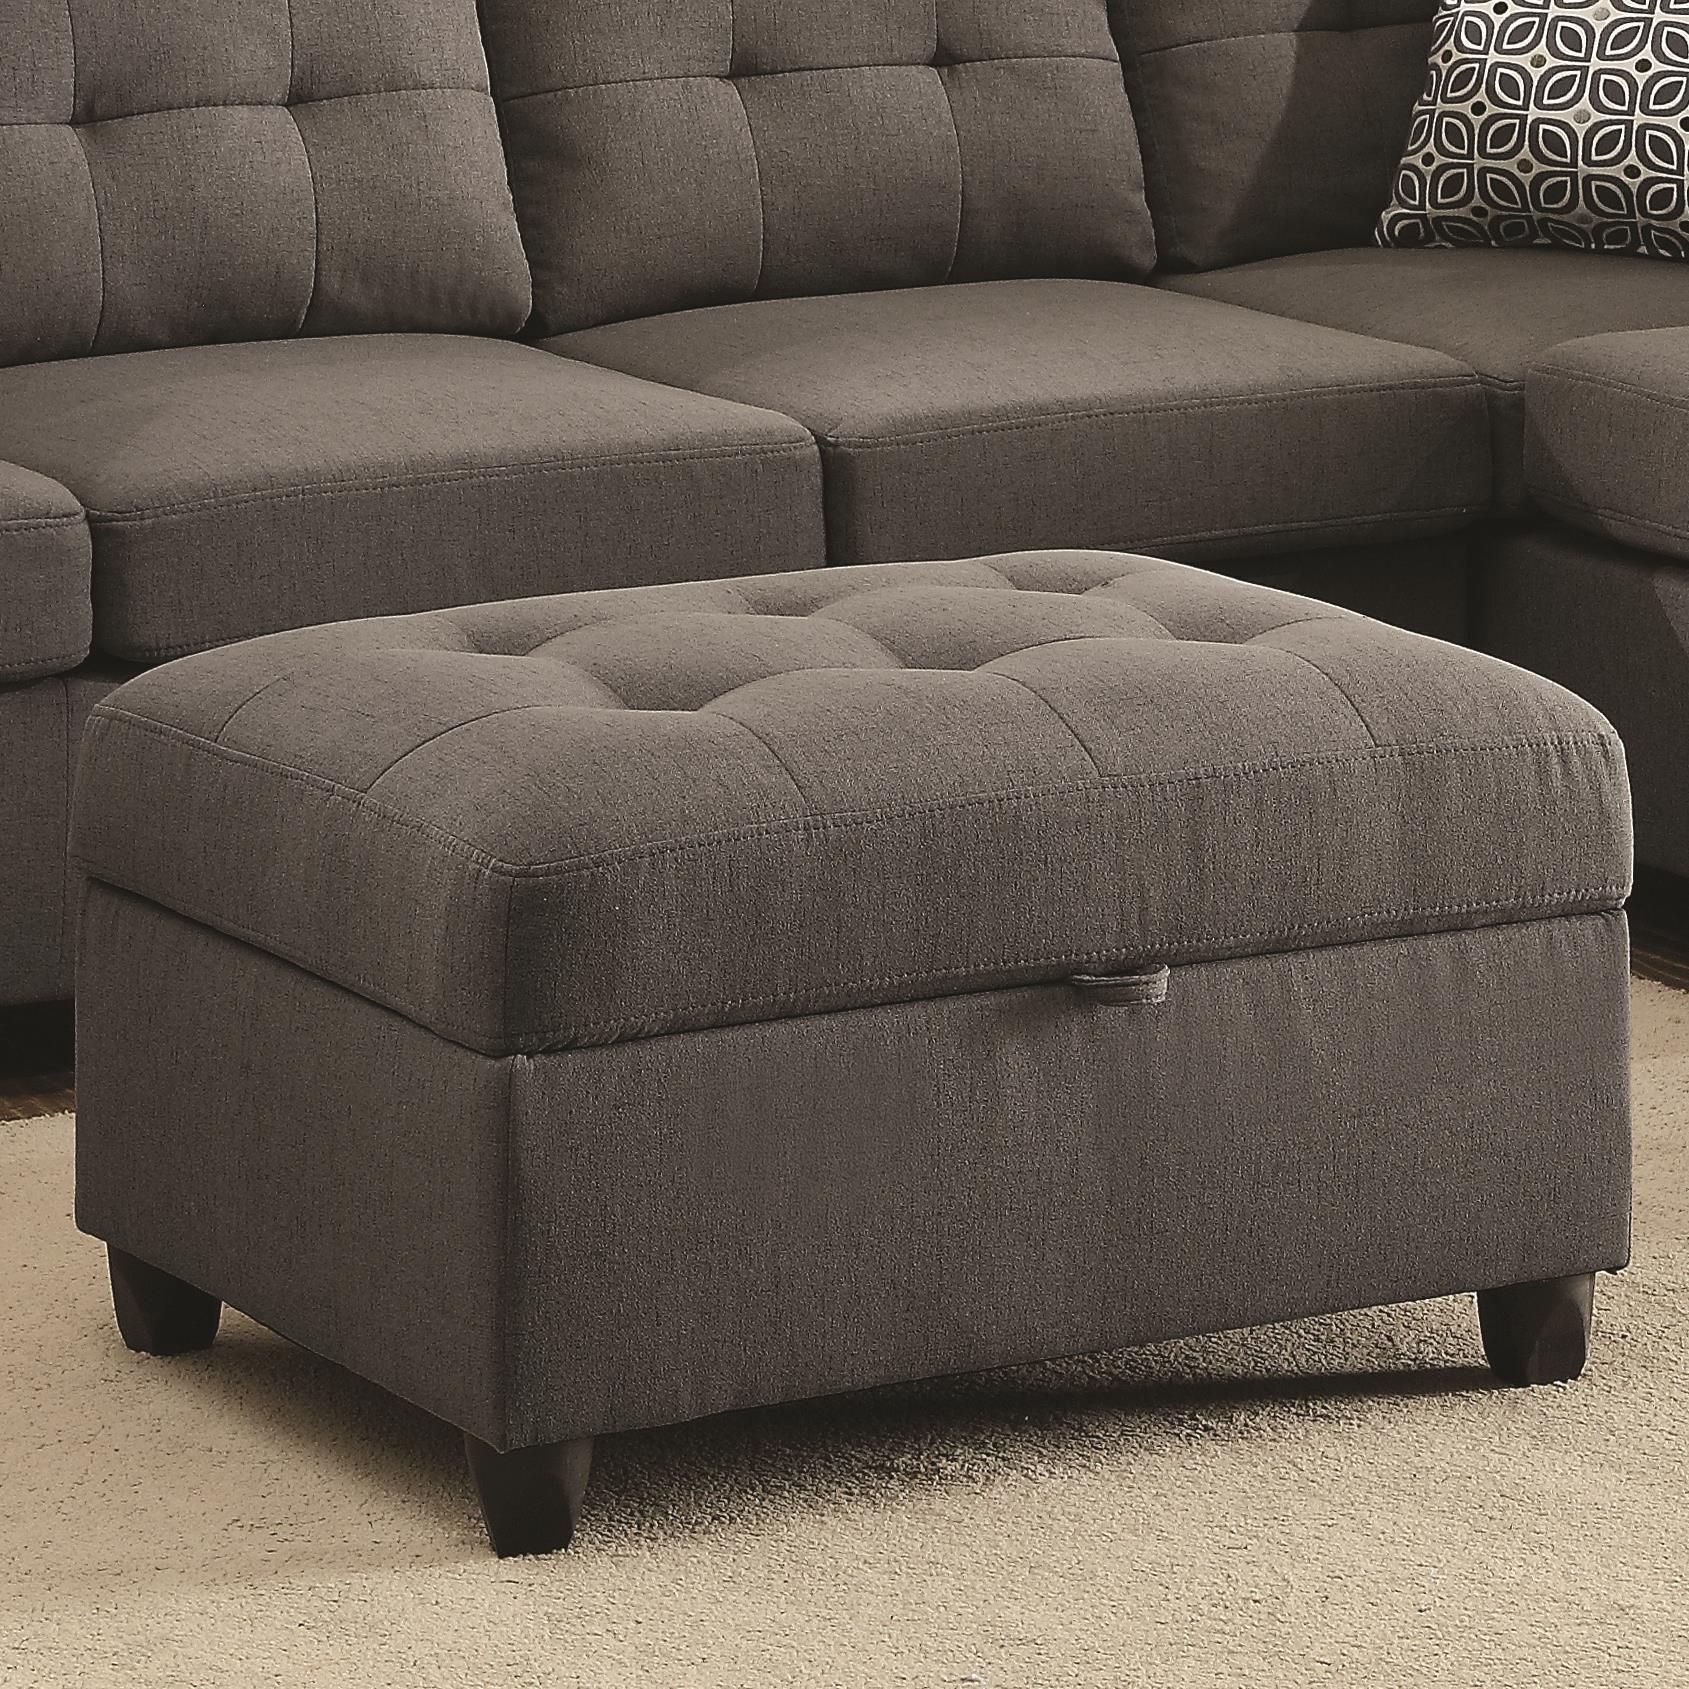 Coaster Stonenesse Grey Storage Ottoman With Button Tufting | Value In Fabric Storage Ottomans (View 3 of 20)